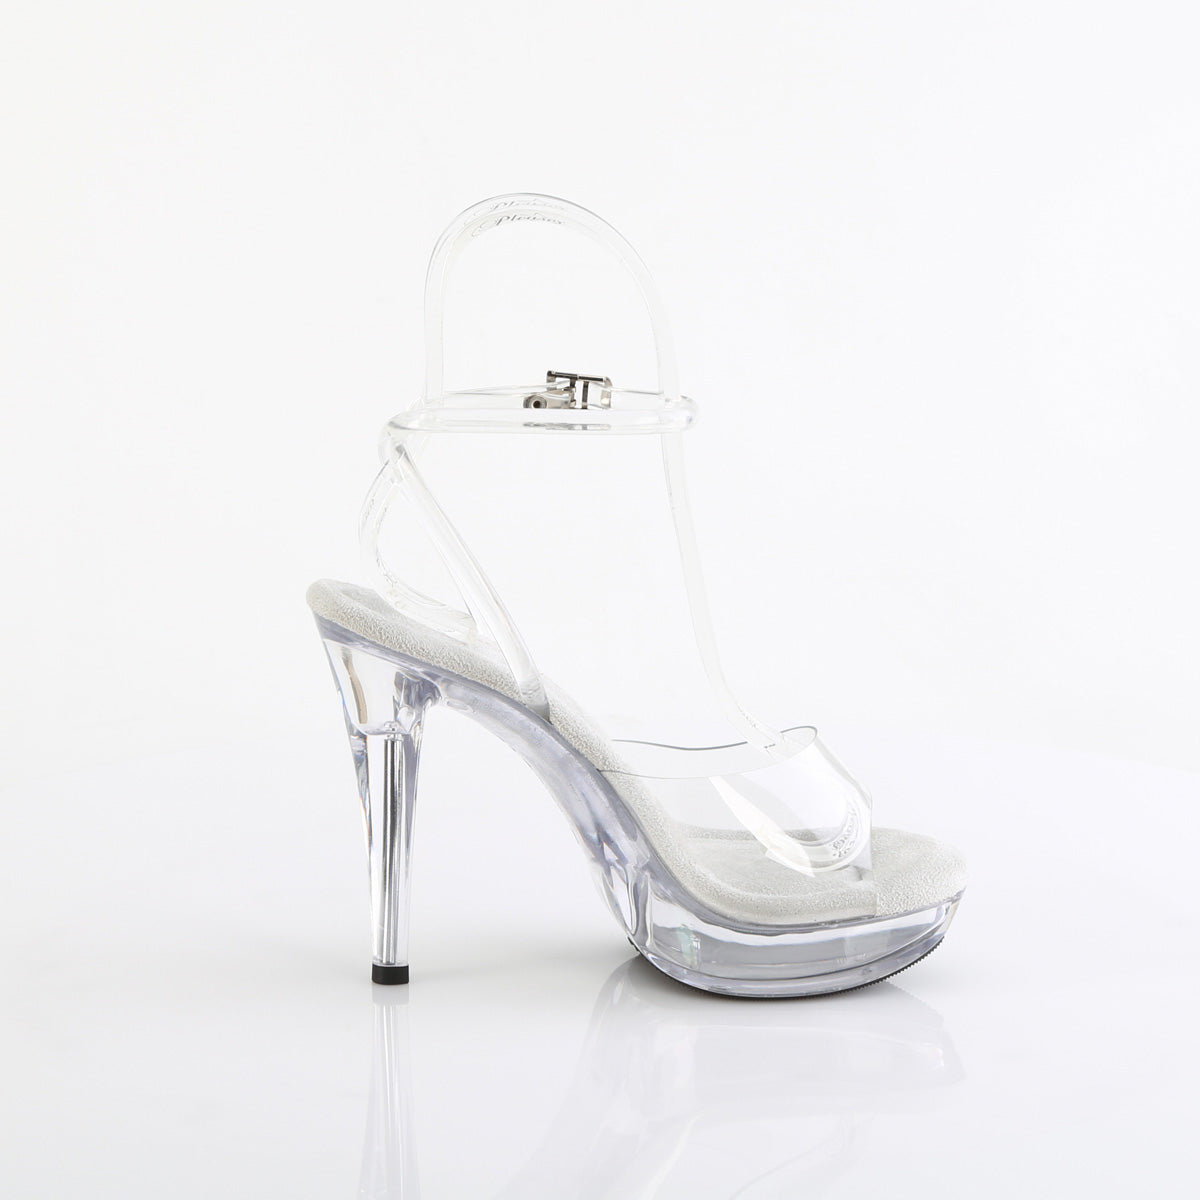 5 Inch Heel COCKTAIL-506 Clear